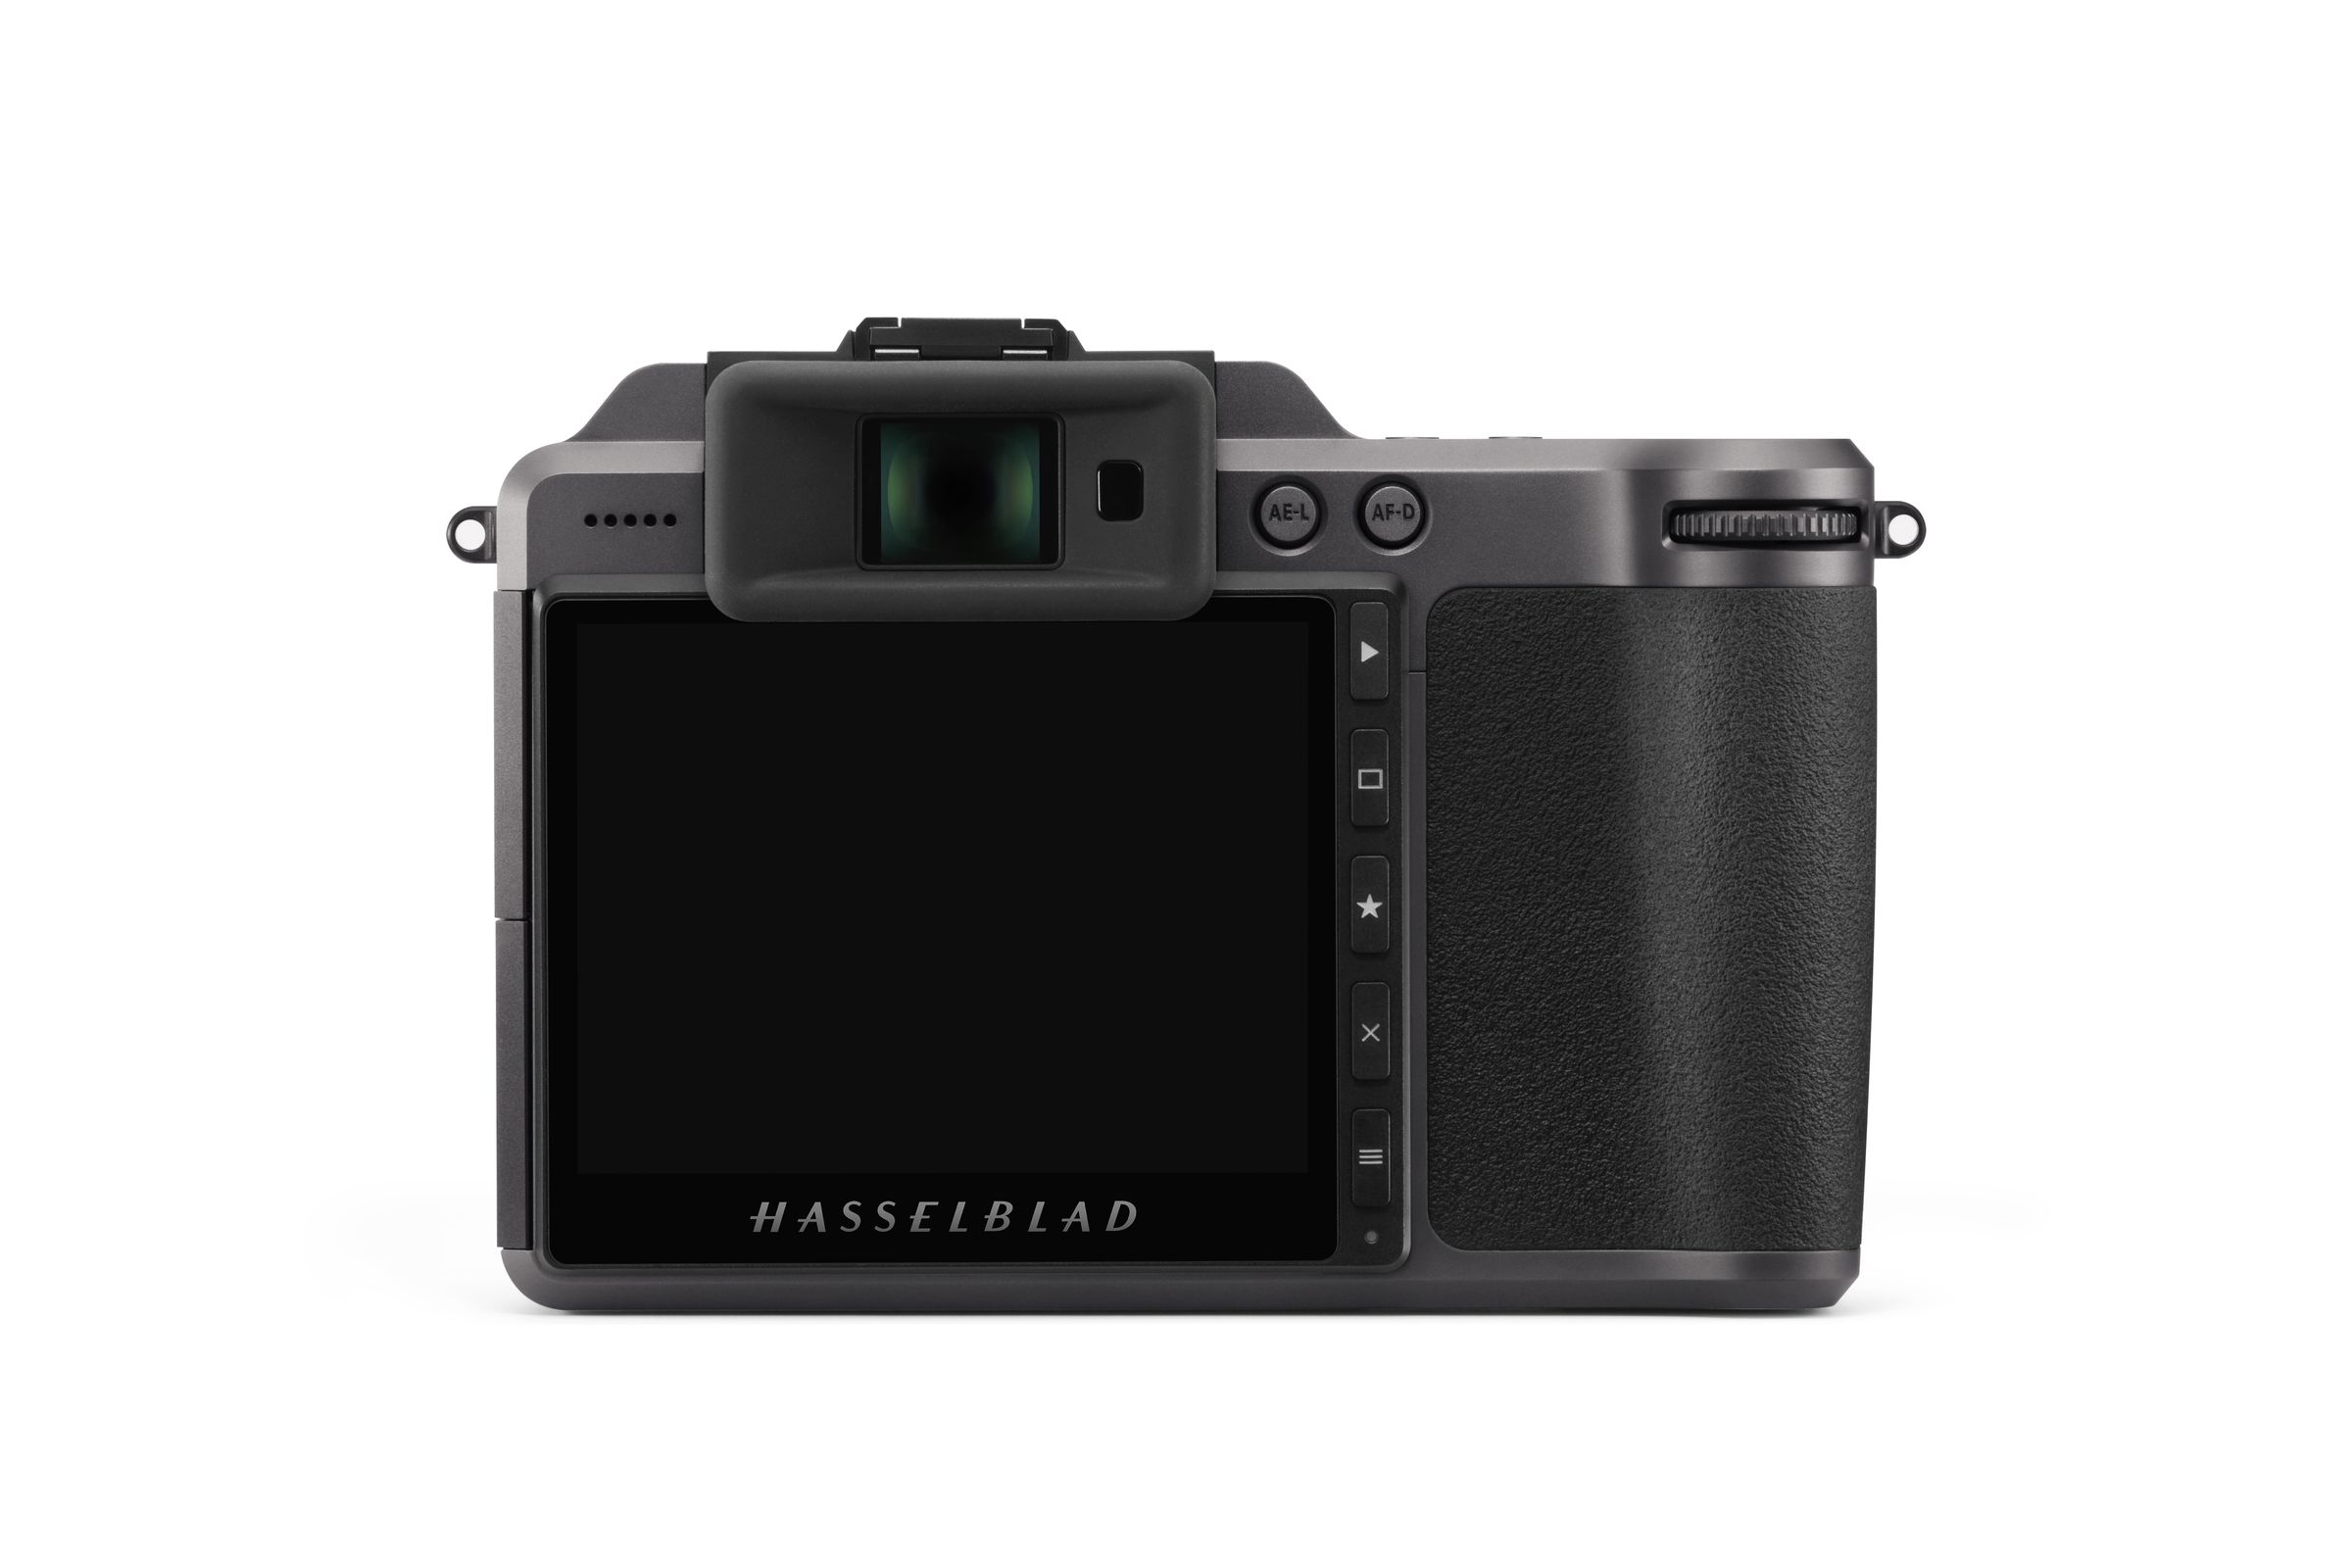 The X1D II has a larger 3.6-inch touchscreen and improved electronic viewfinder